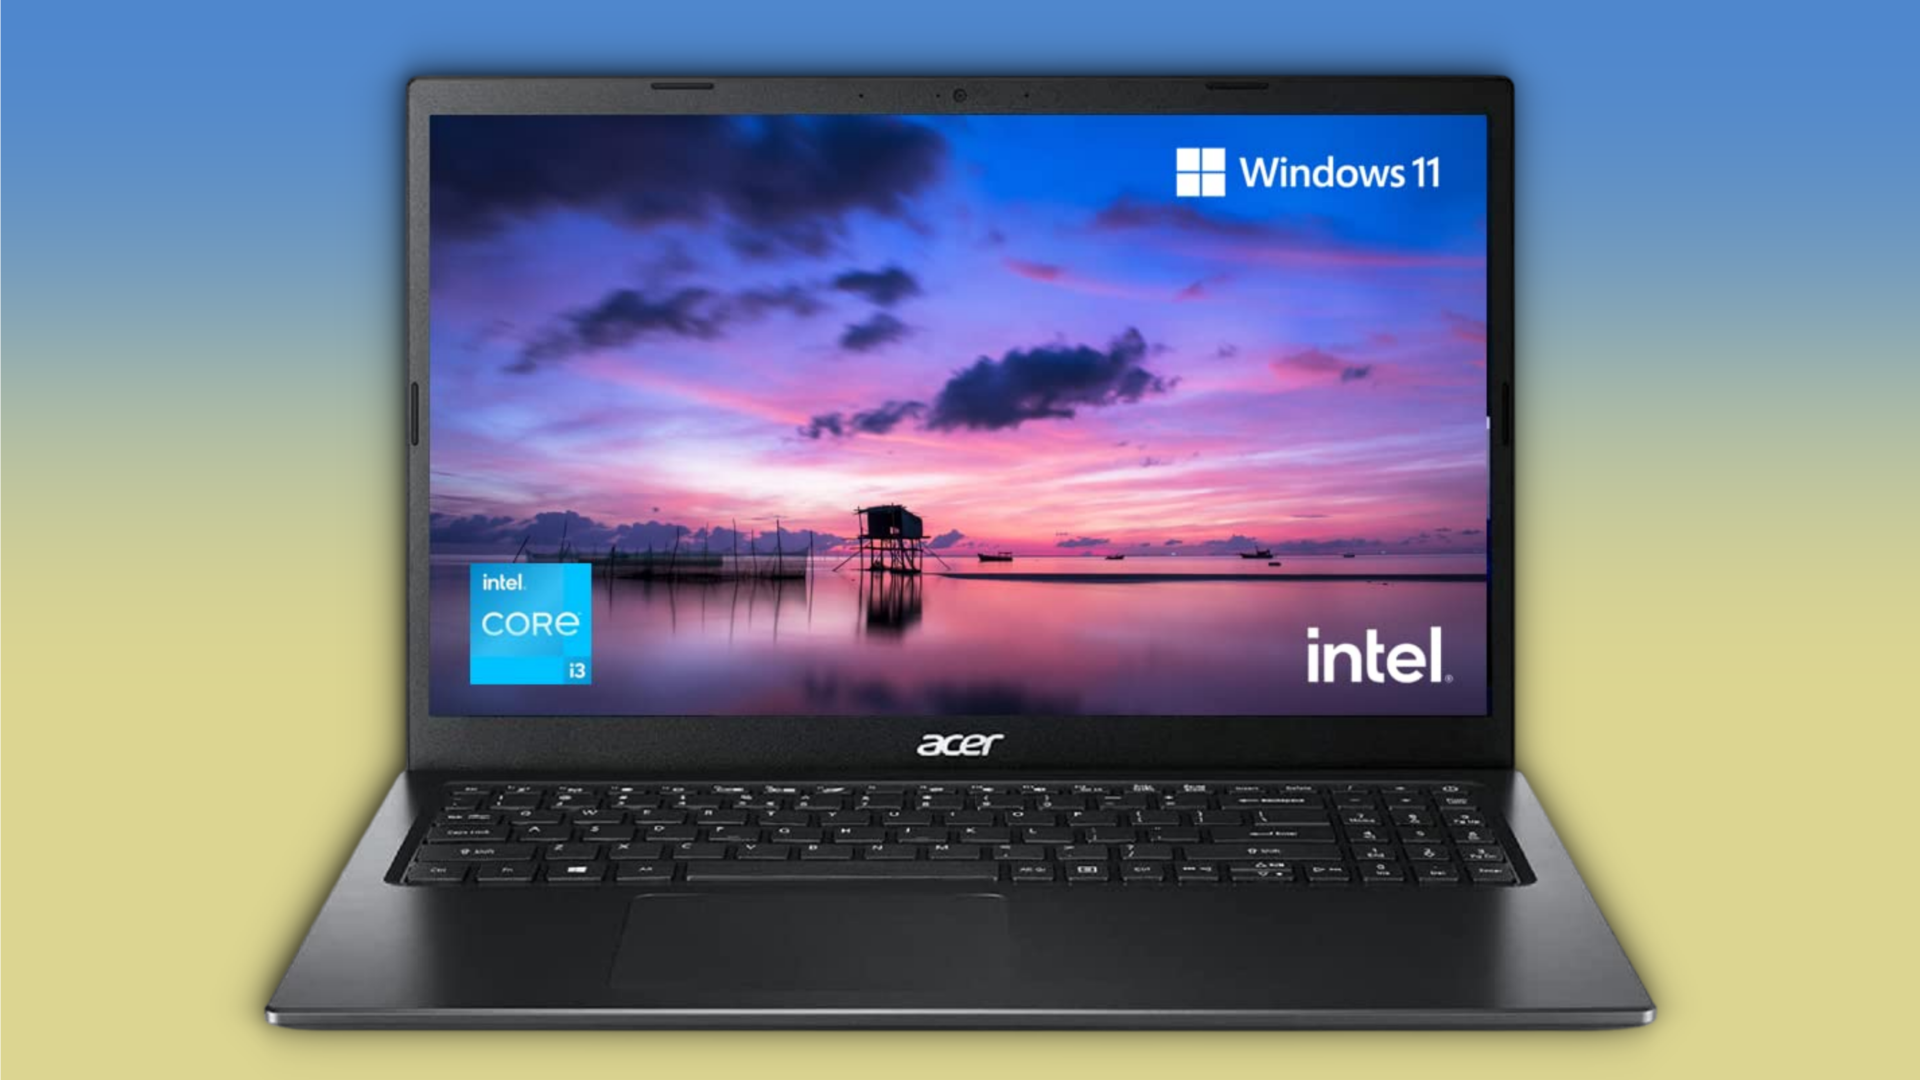 Acer Extensa 15 is retailing with attractive discounts, exchange offers